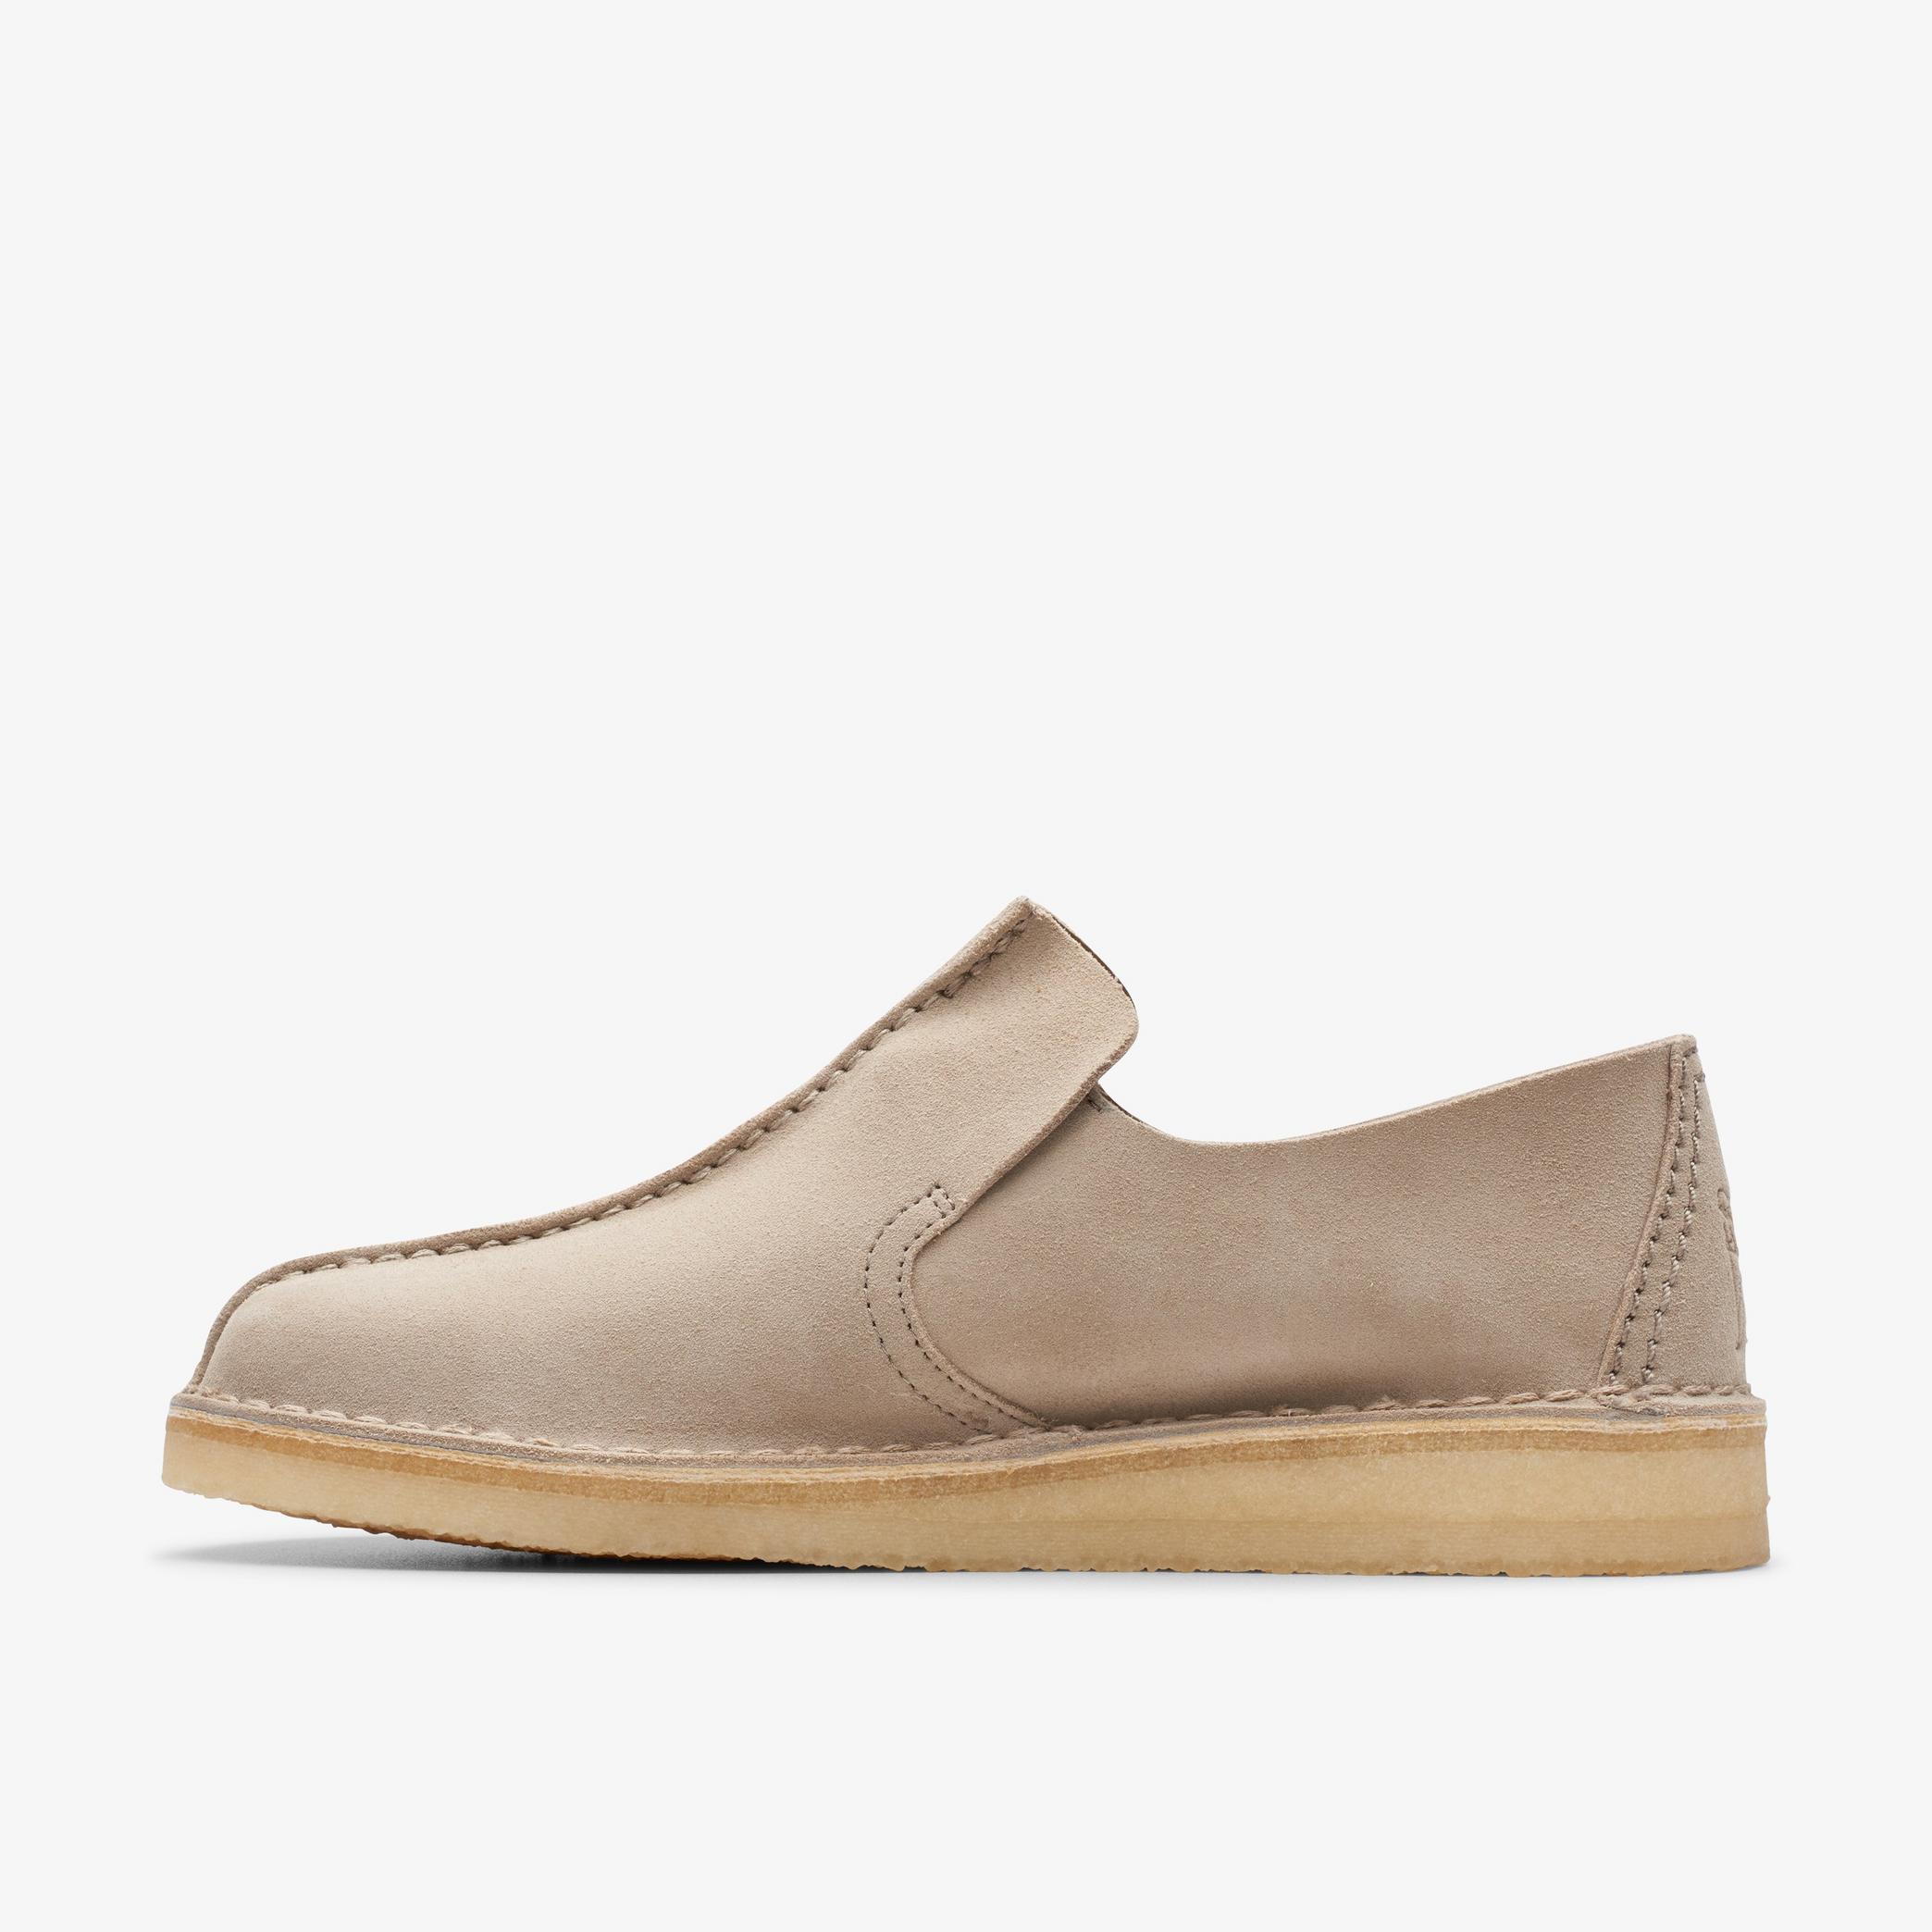 Desert Mosier Sand Suede Loafers, view 2 of 6